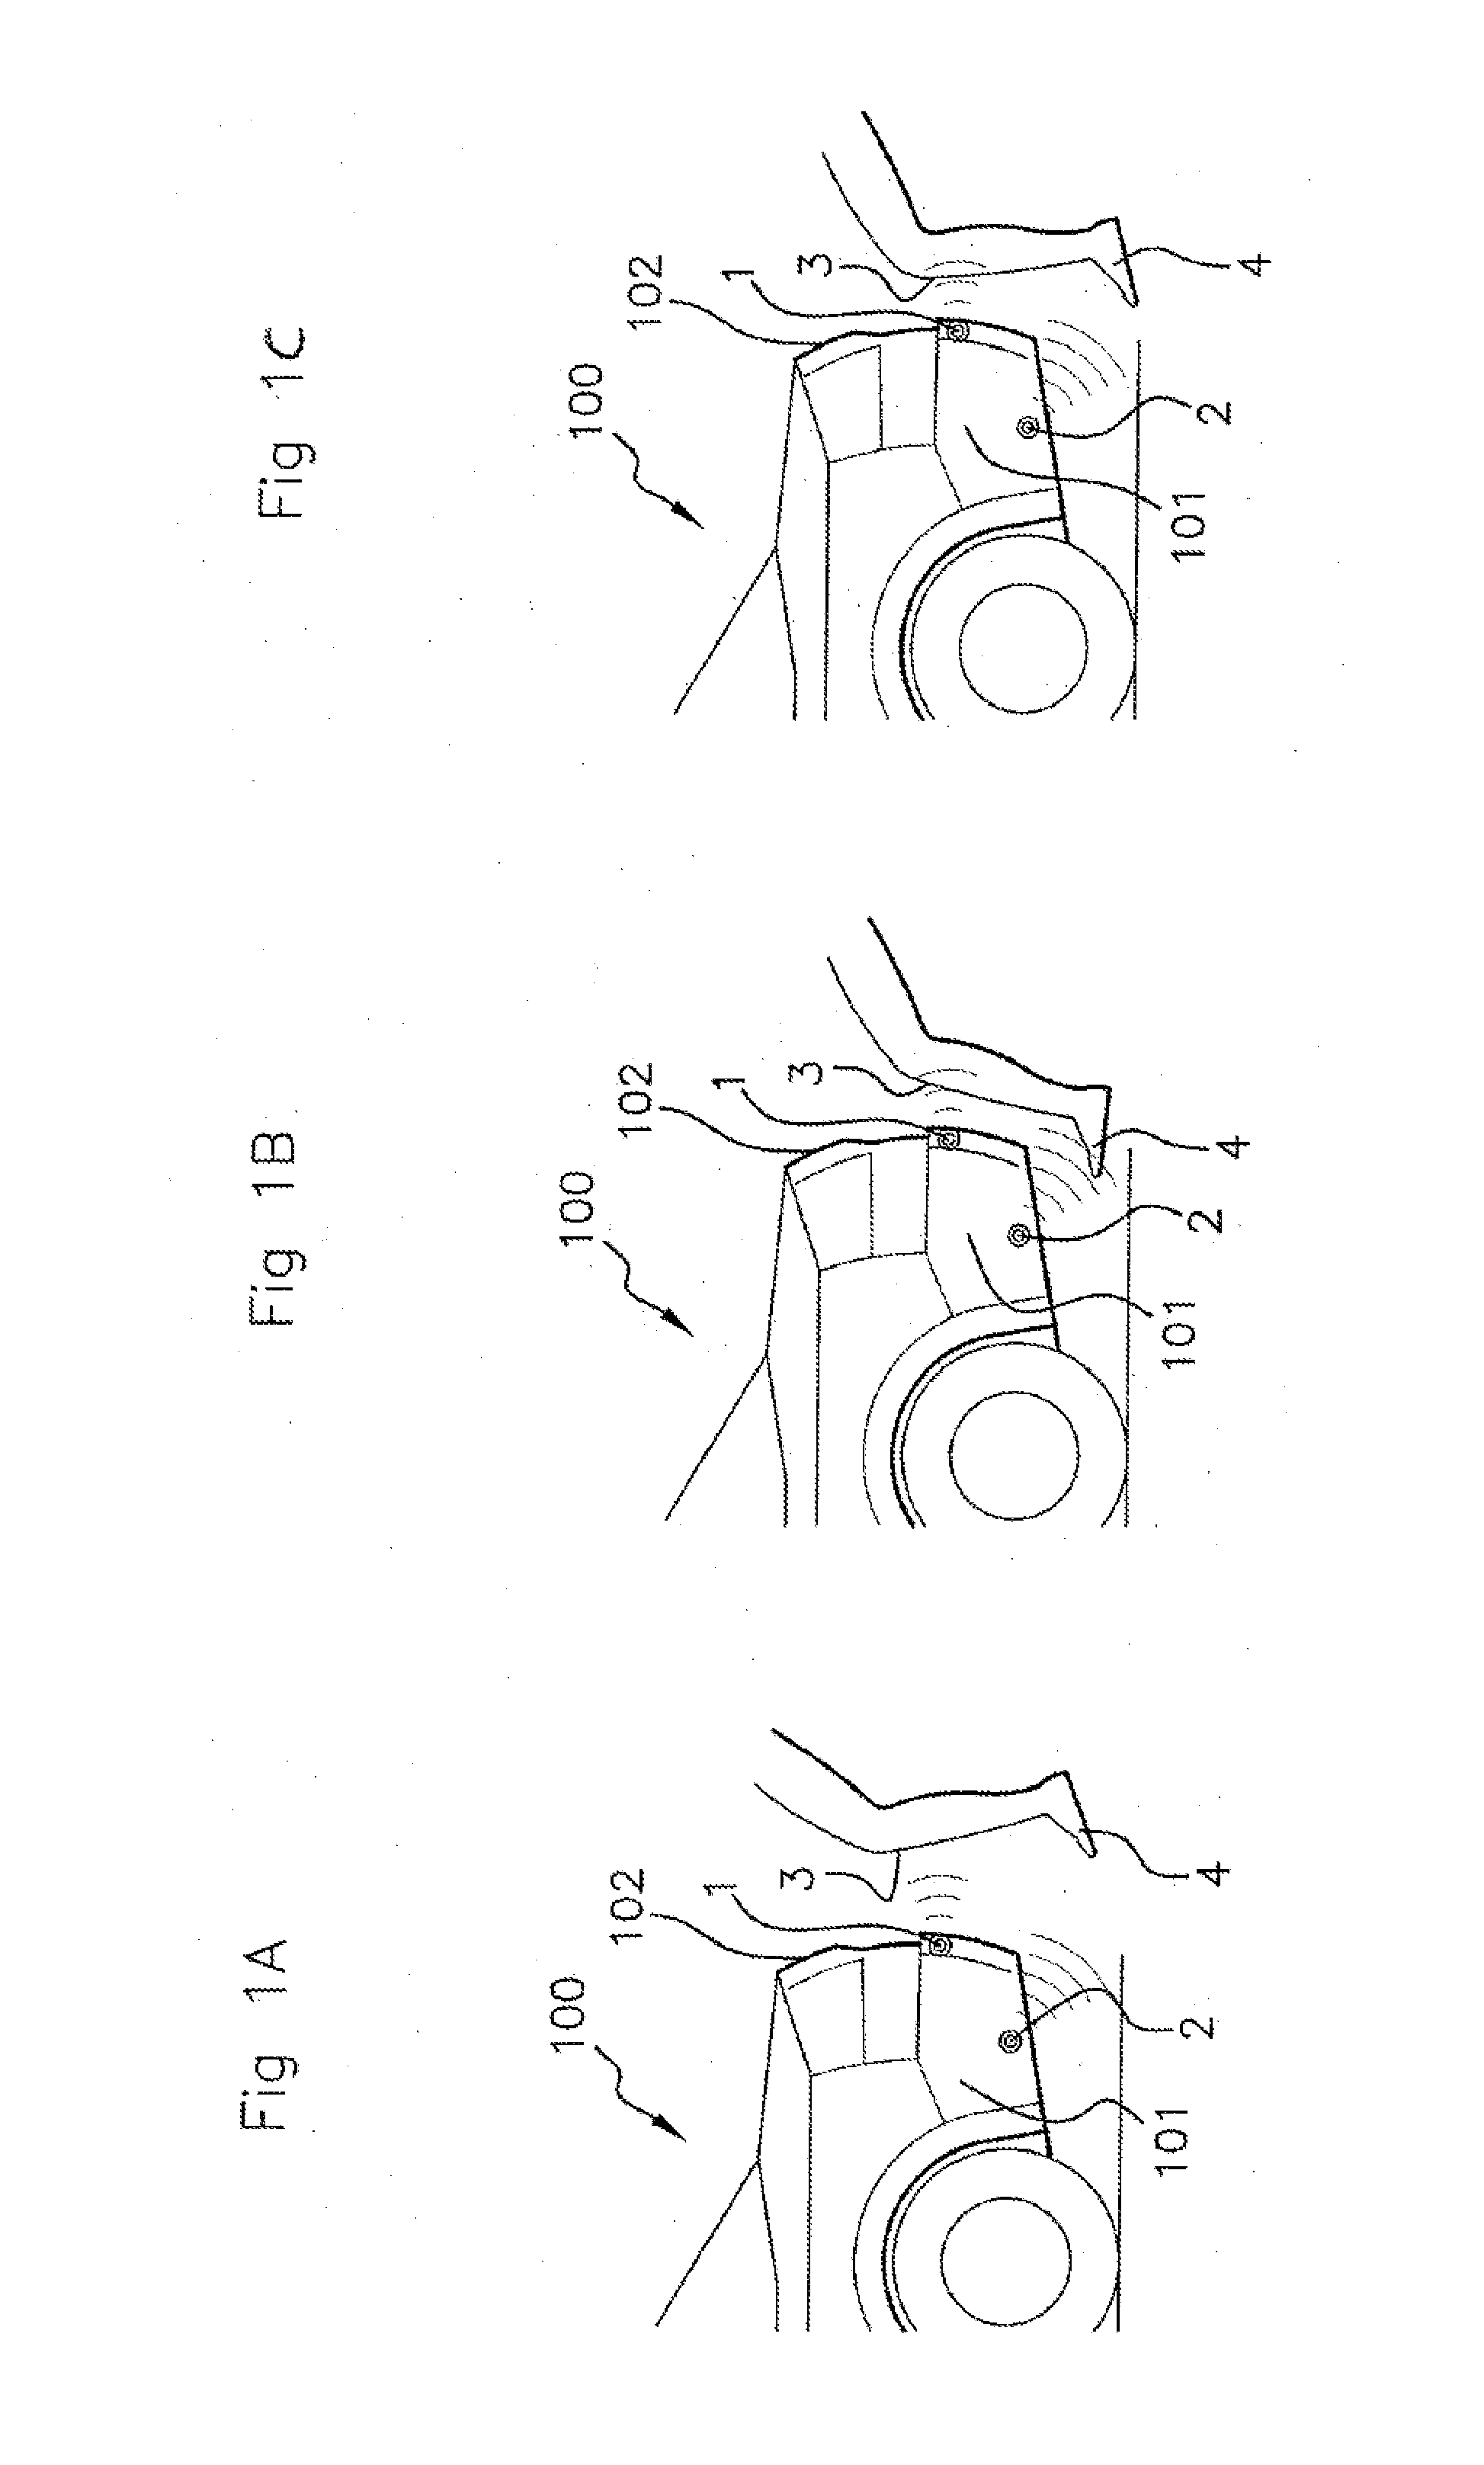 Method for opening/closing of a secure hands-free access by detection of movement of a lower member of a user